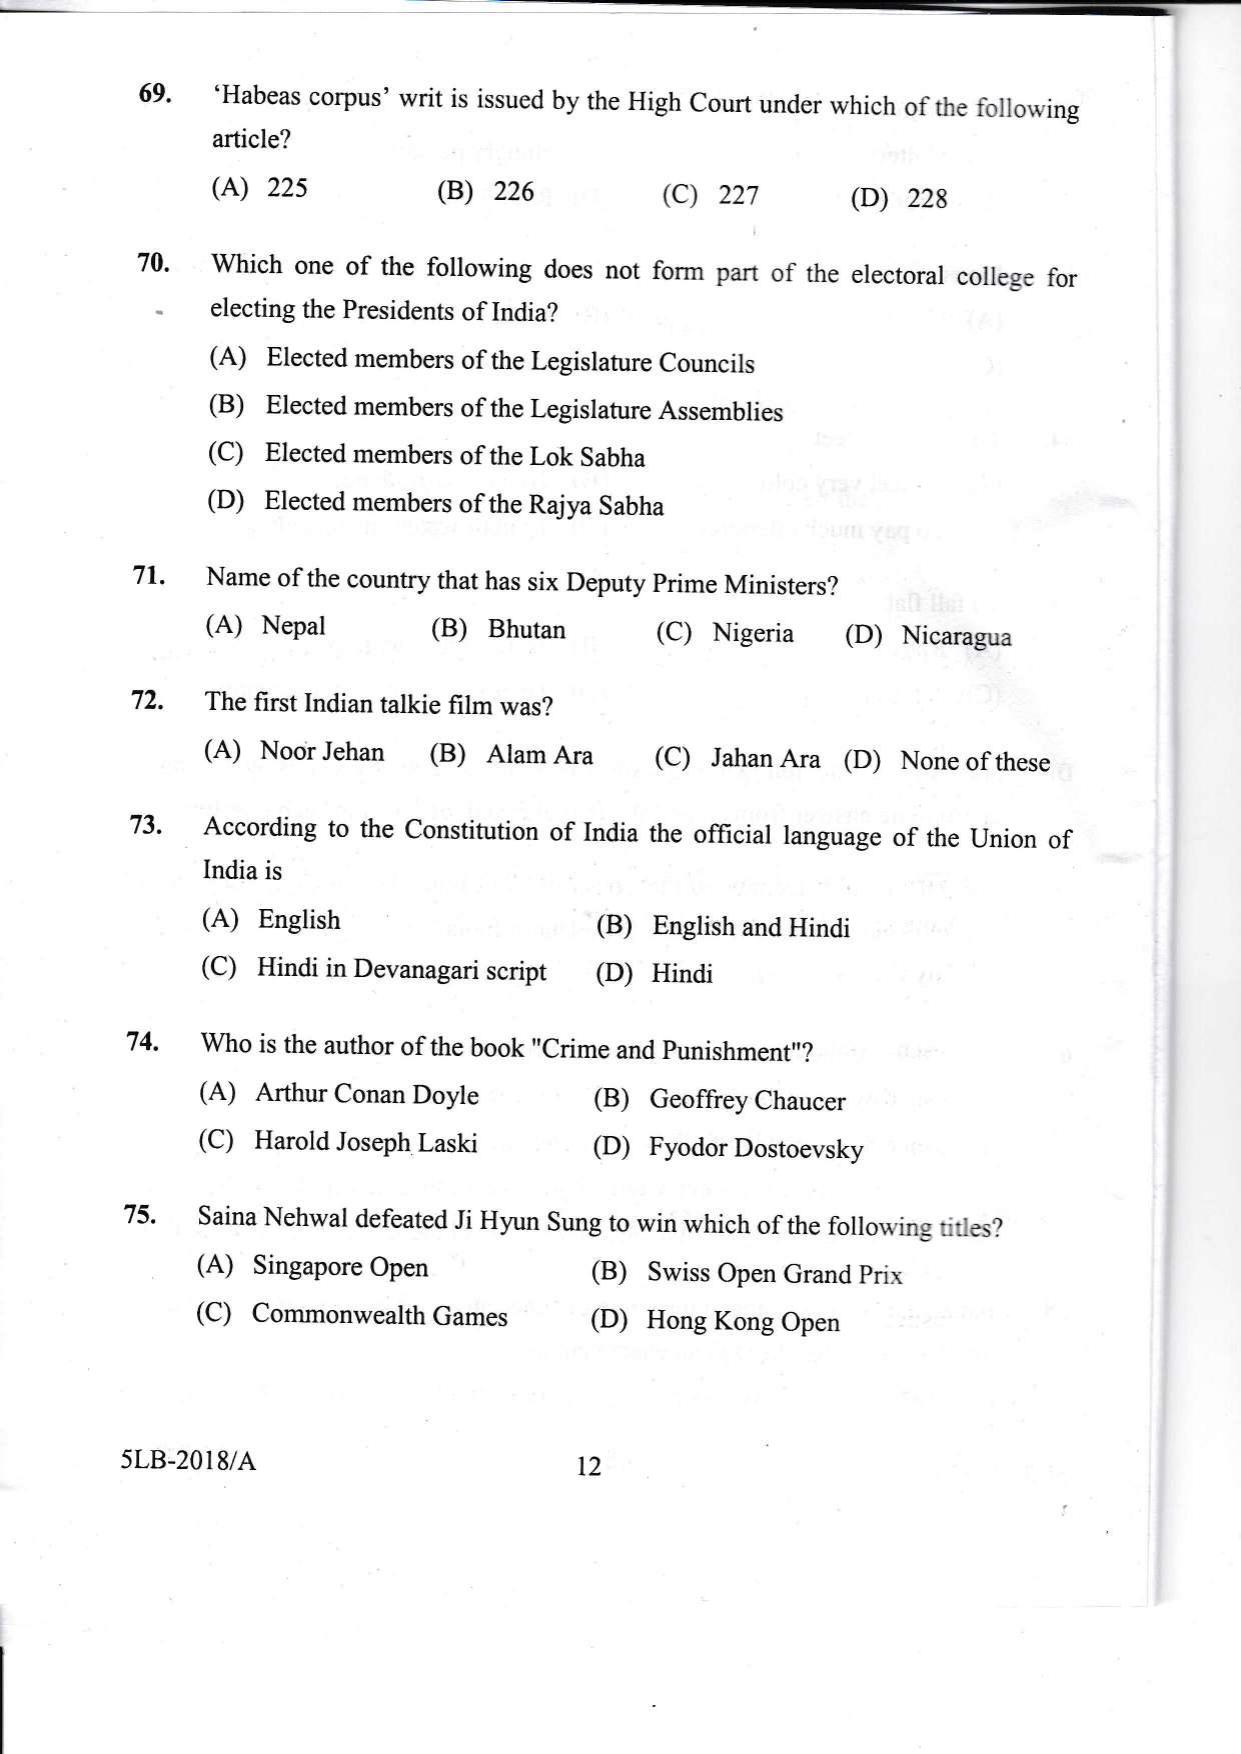 KLEE 5 Year LLB Exam 2018 Question Paper - Page 12